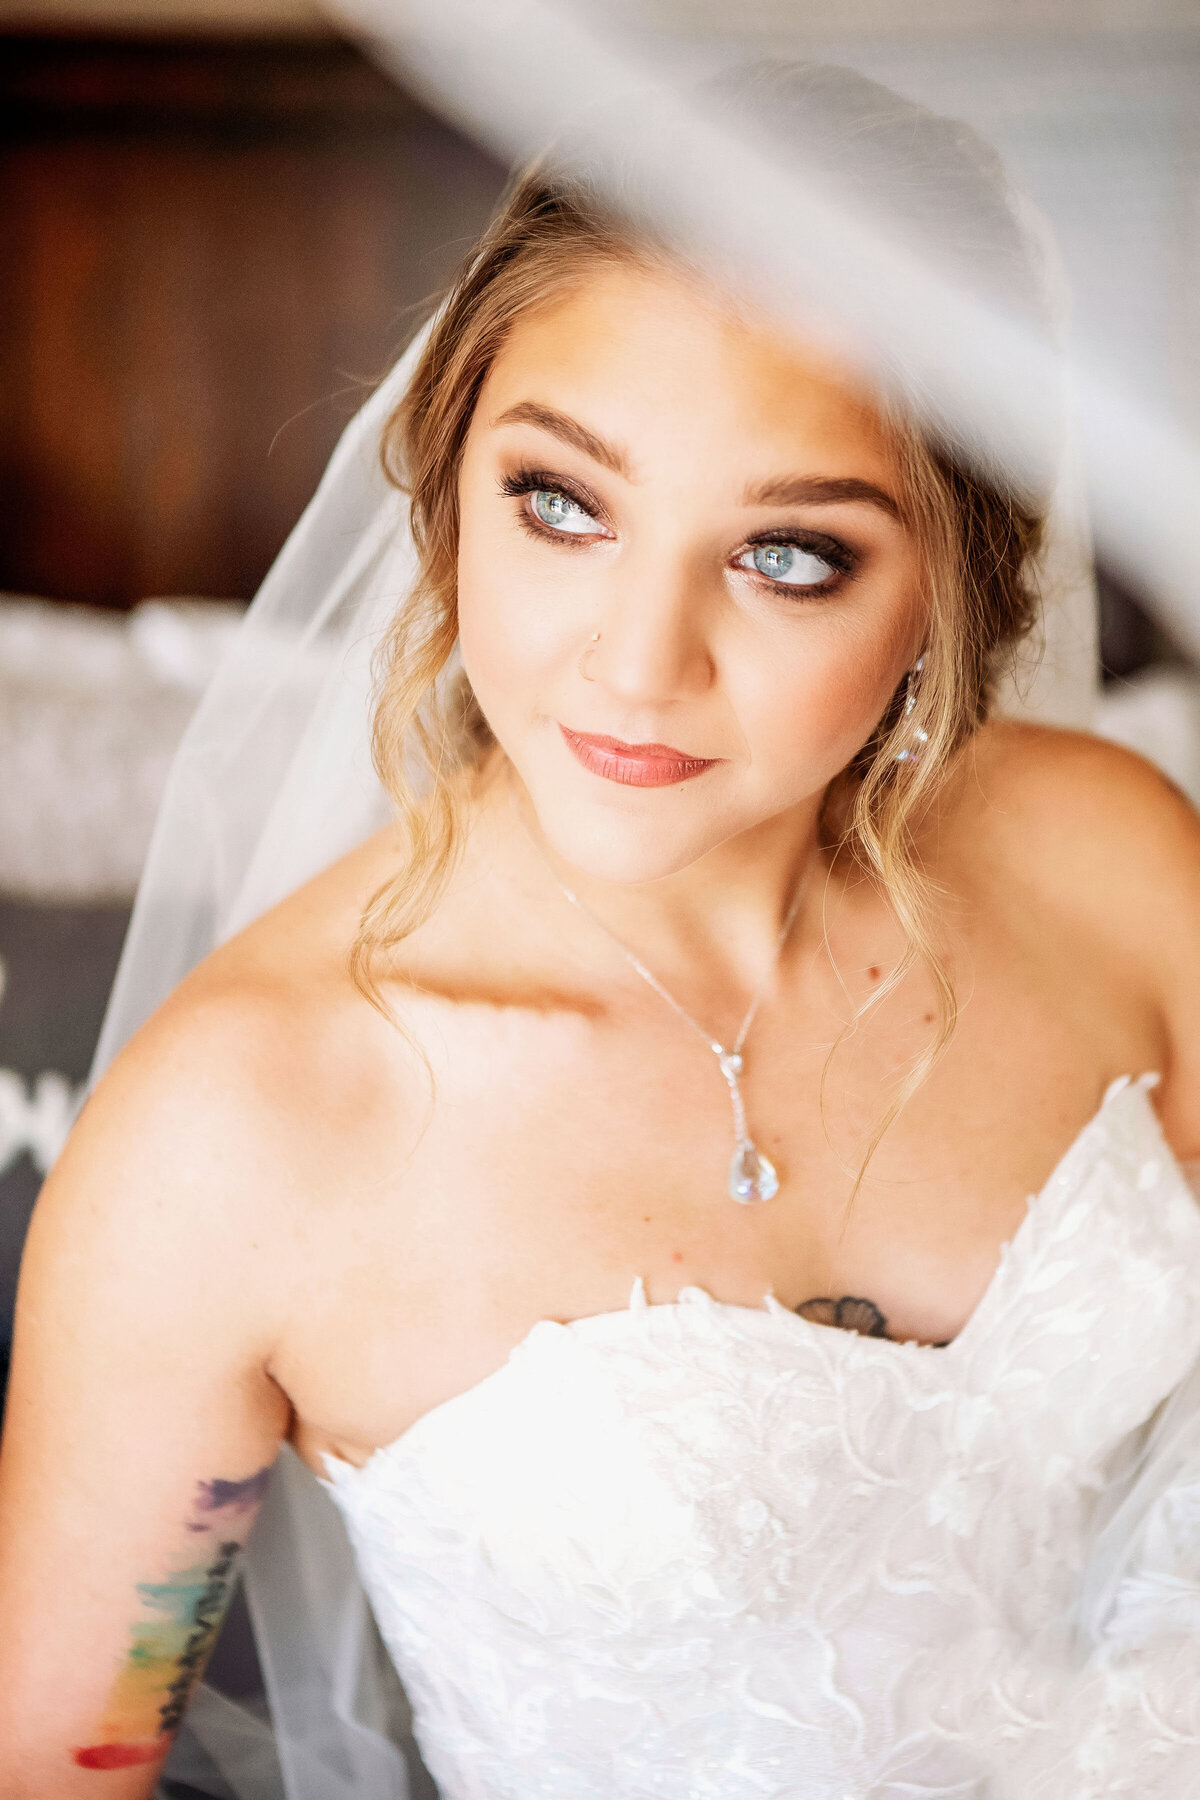 A bride glances up for a moment, as her bright blue gorgeous eyes shine brightly,